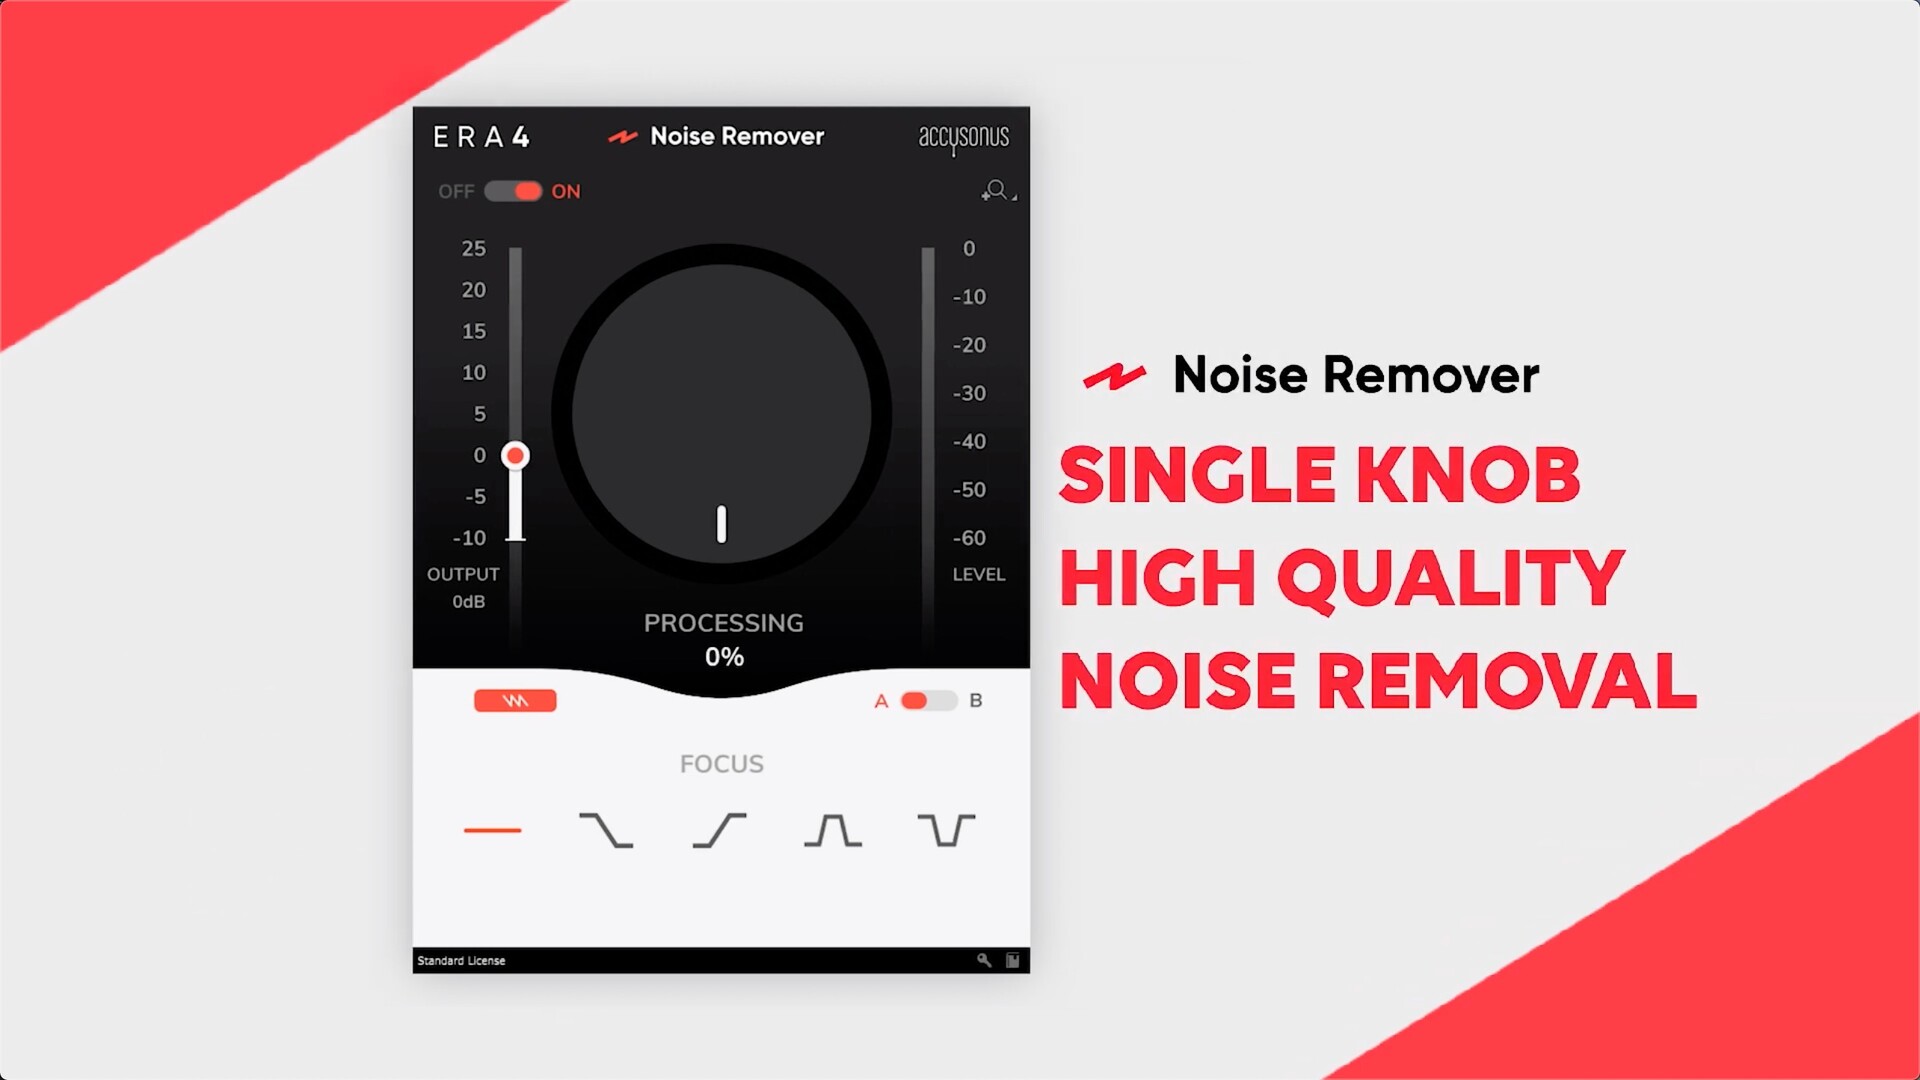 fcpx插件：噪音消除器 Noise Remover